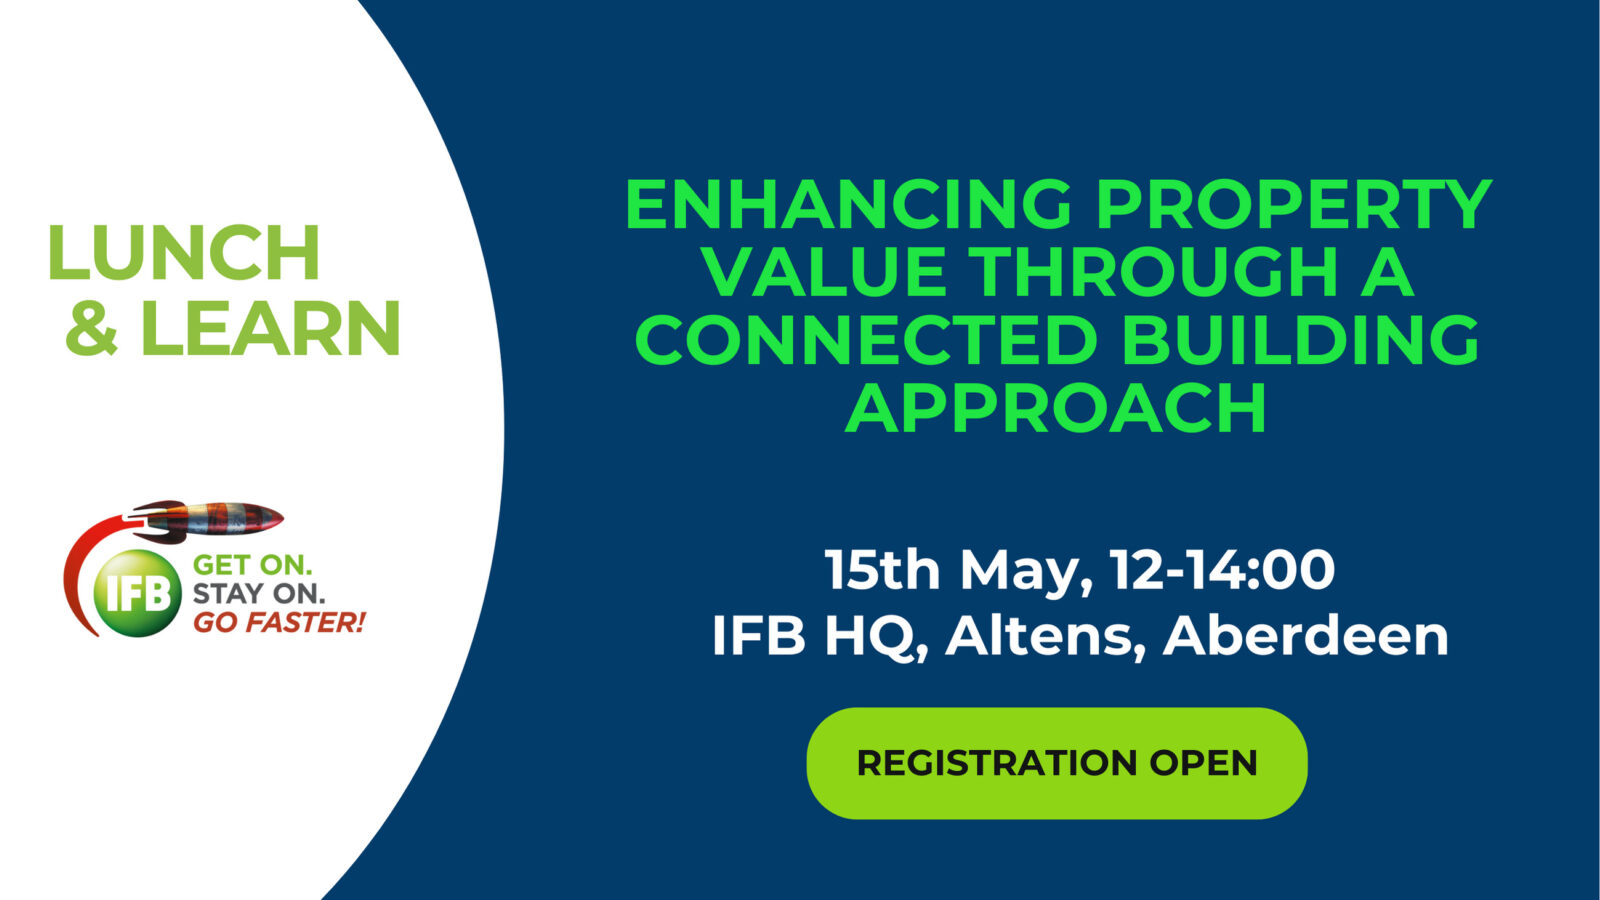 IFB to host Lunch & Learn Session: Enhancing property value through a connected building approach